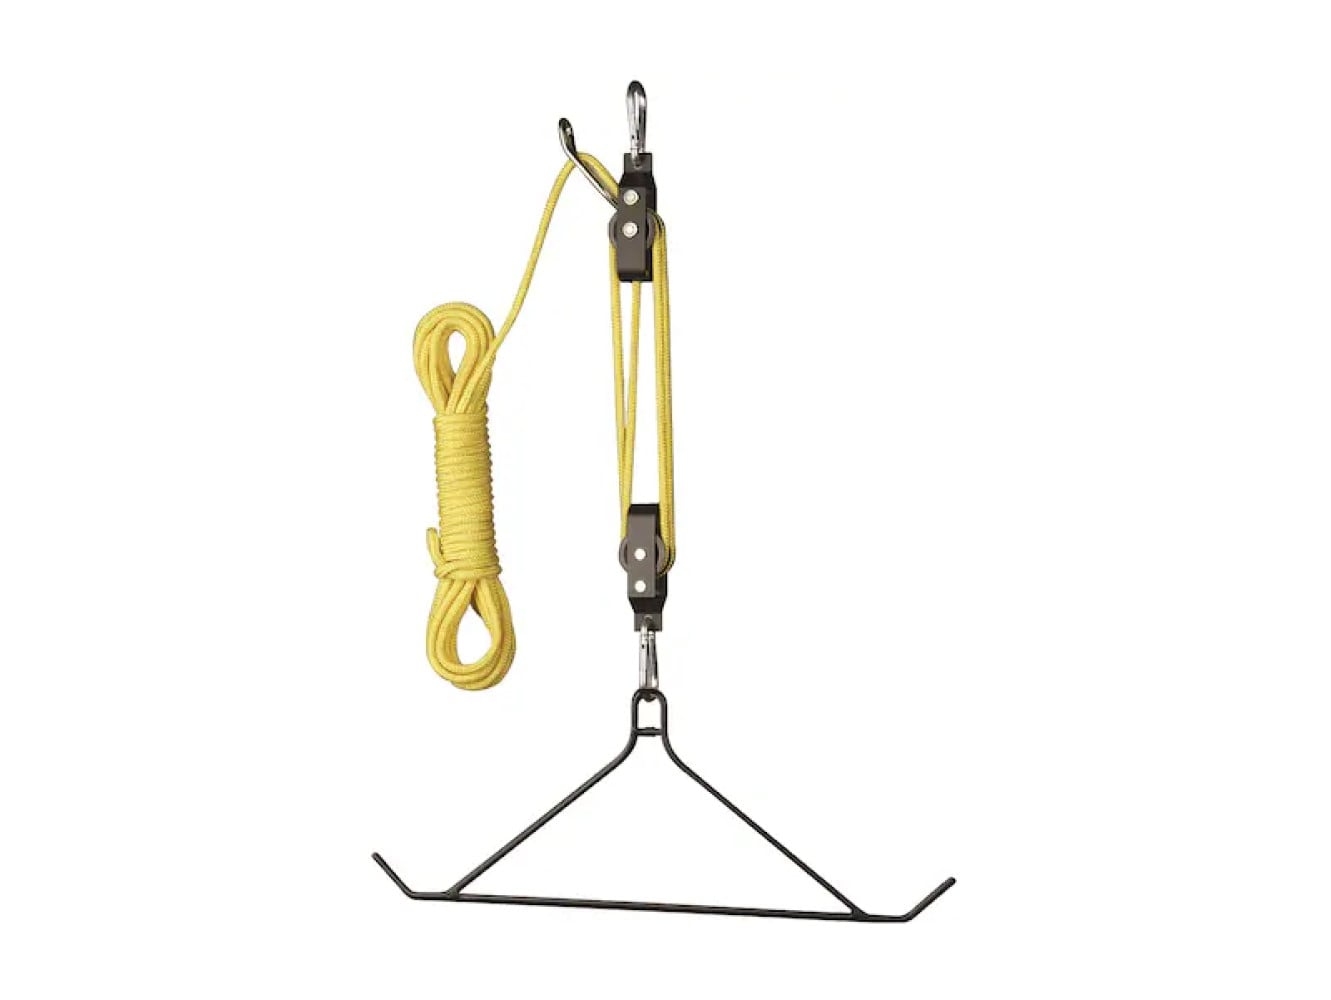 Hunters Specialties Game Lift System with 4:1 Lift Ratio, 40-Ft